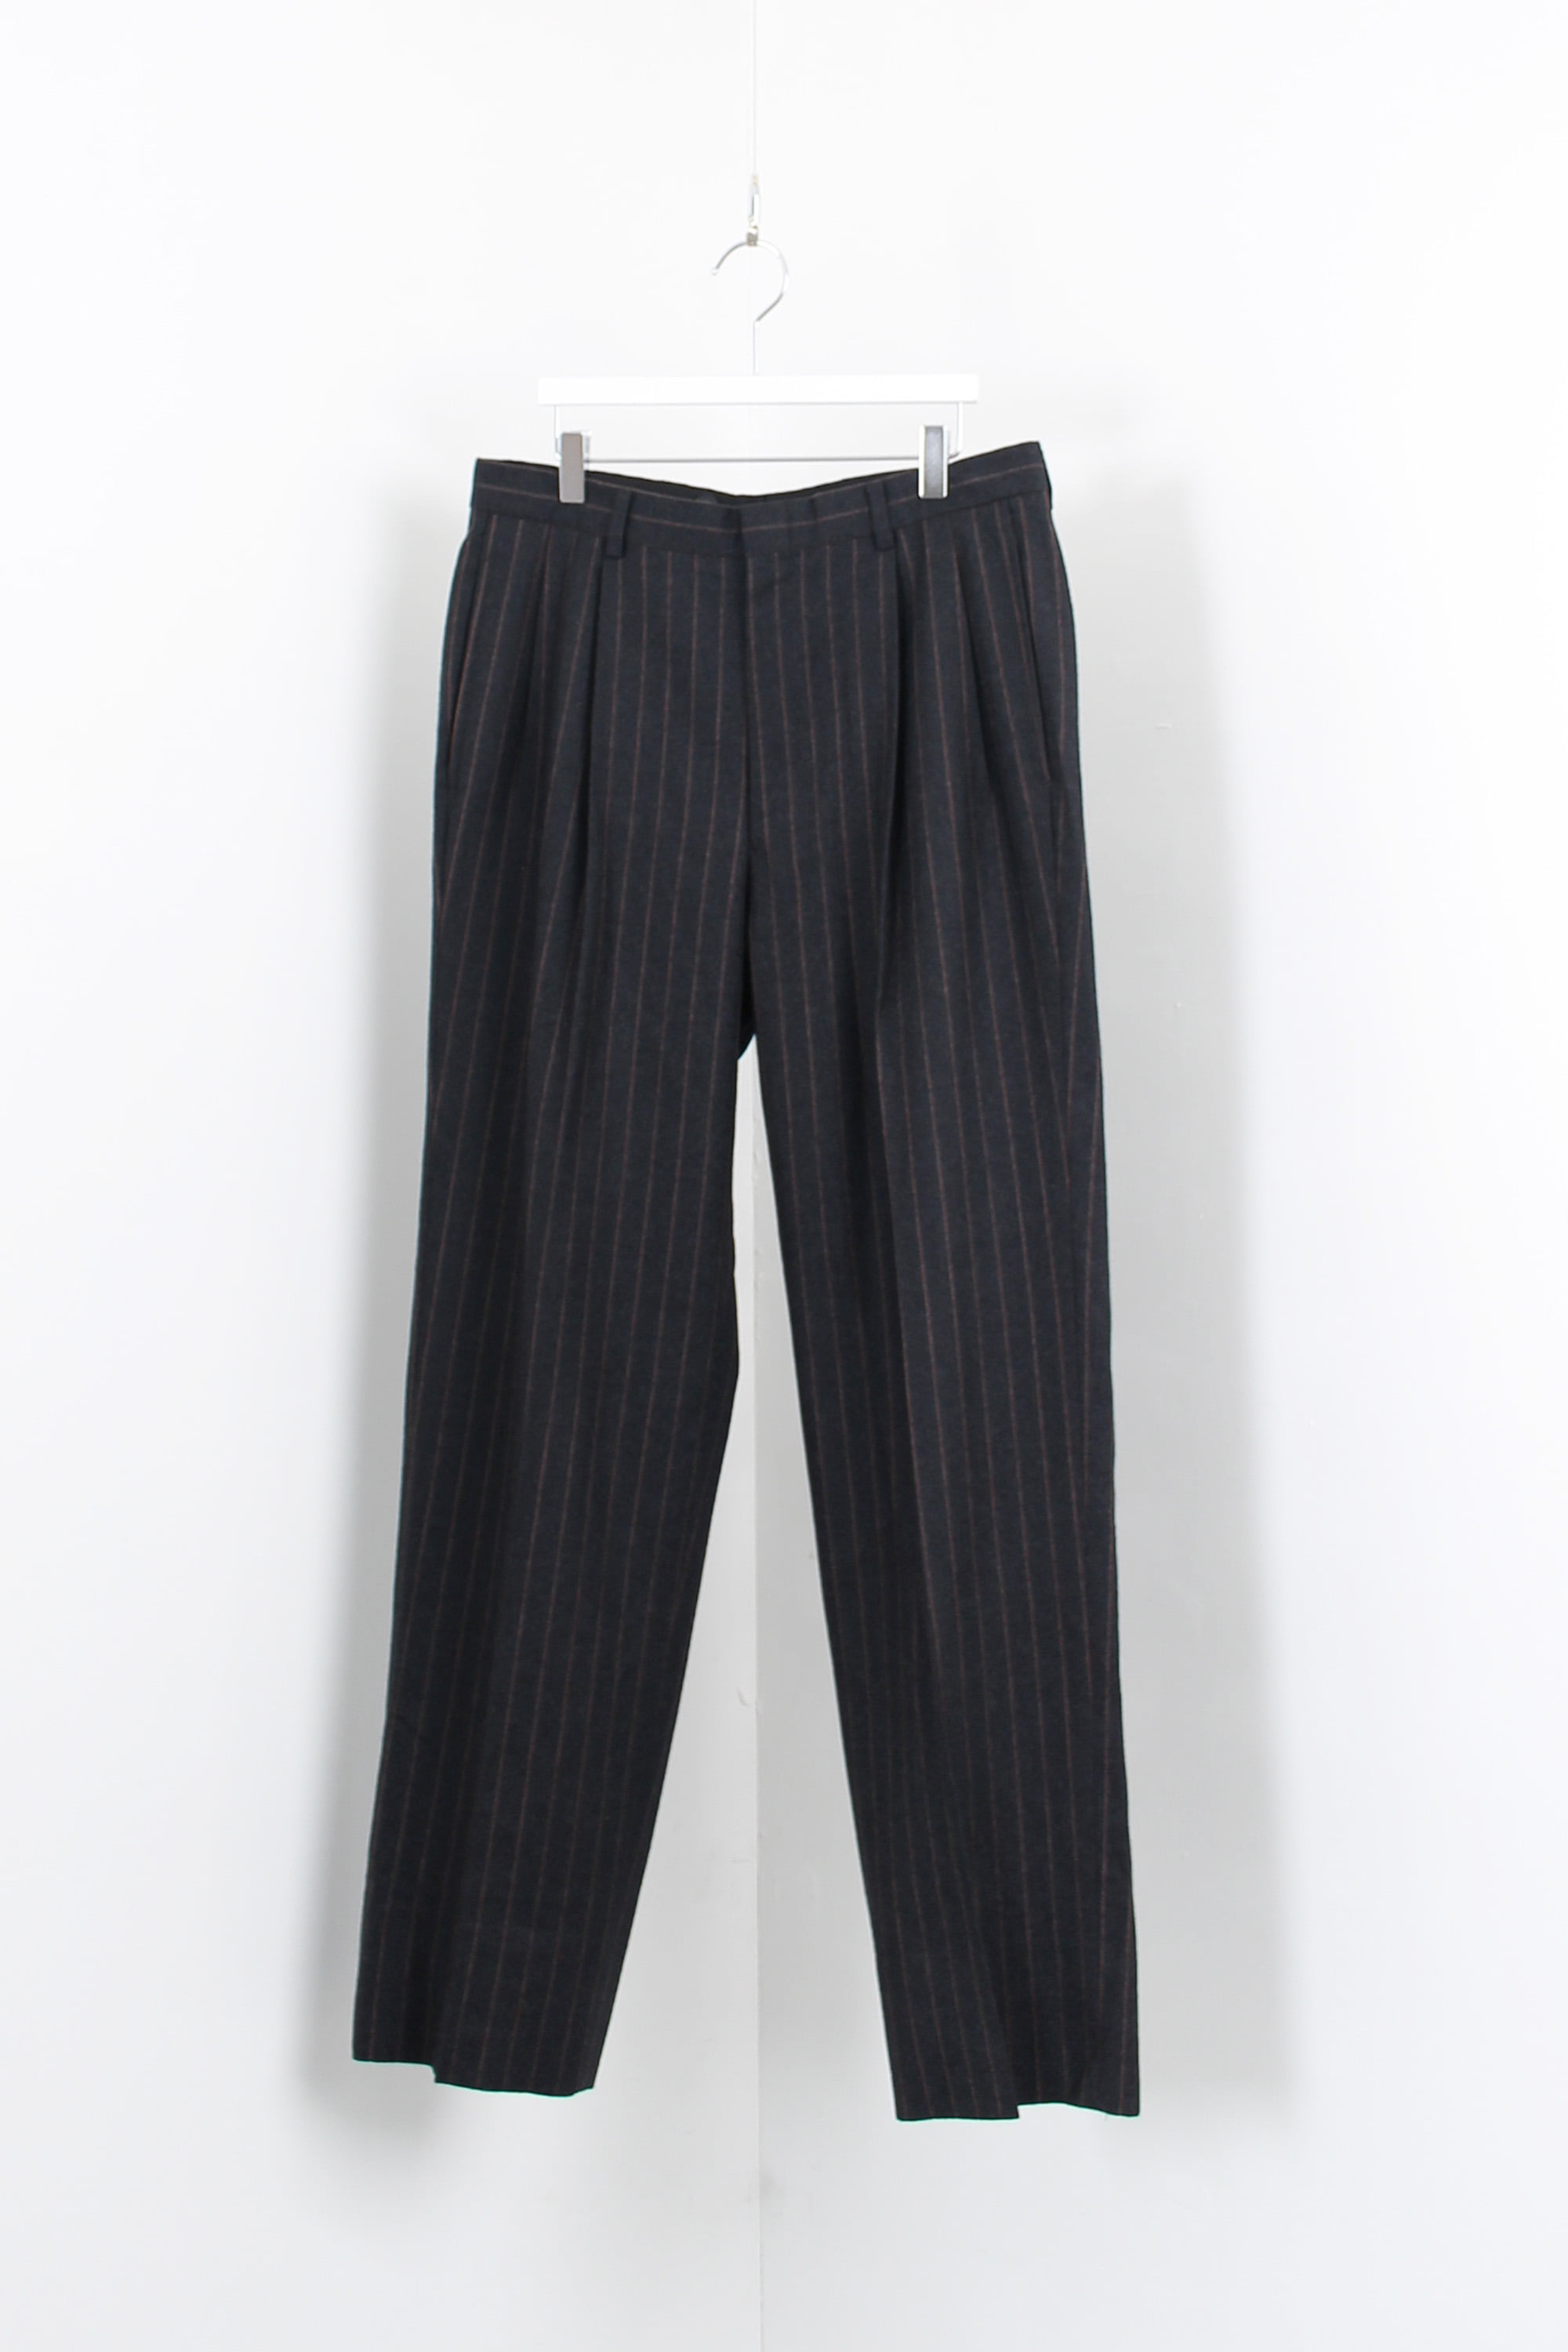 Brooks Brothers two tuck pants